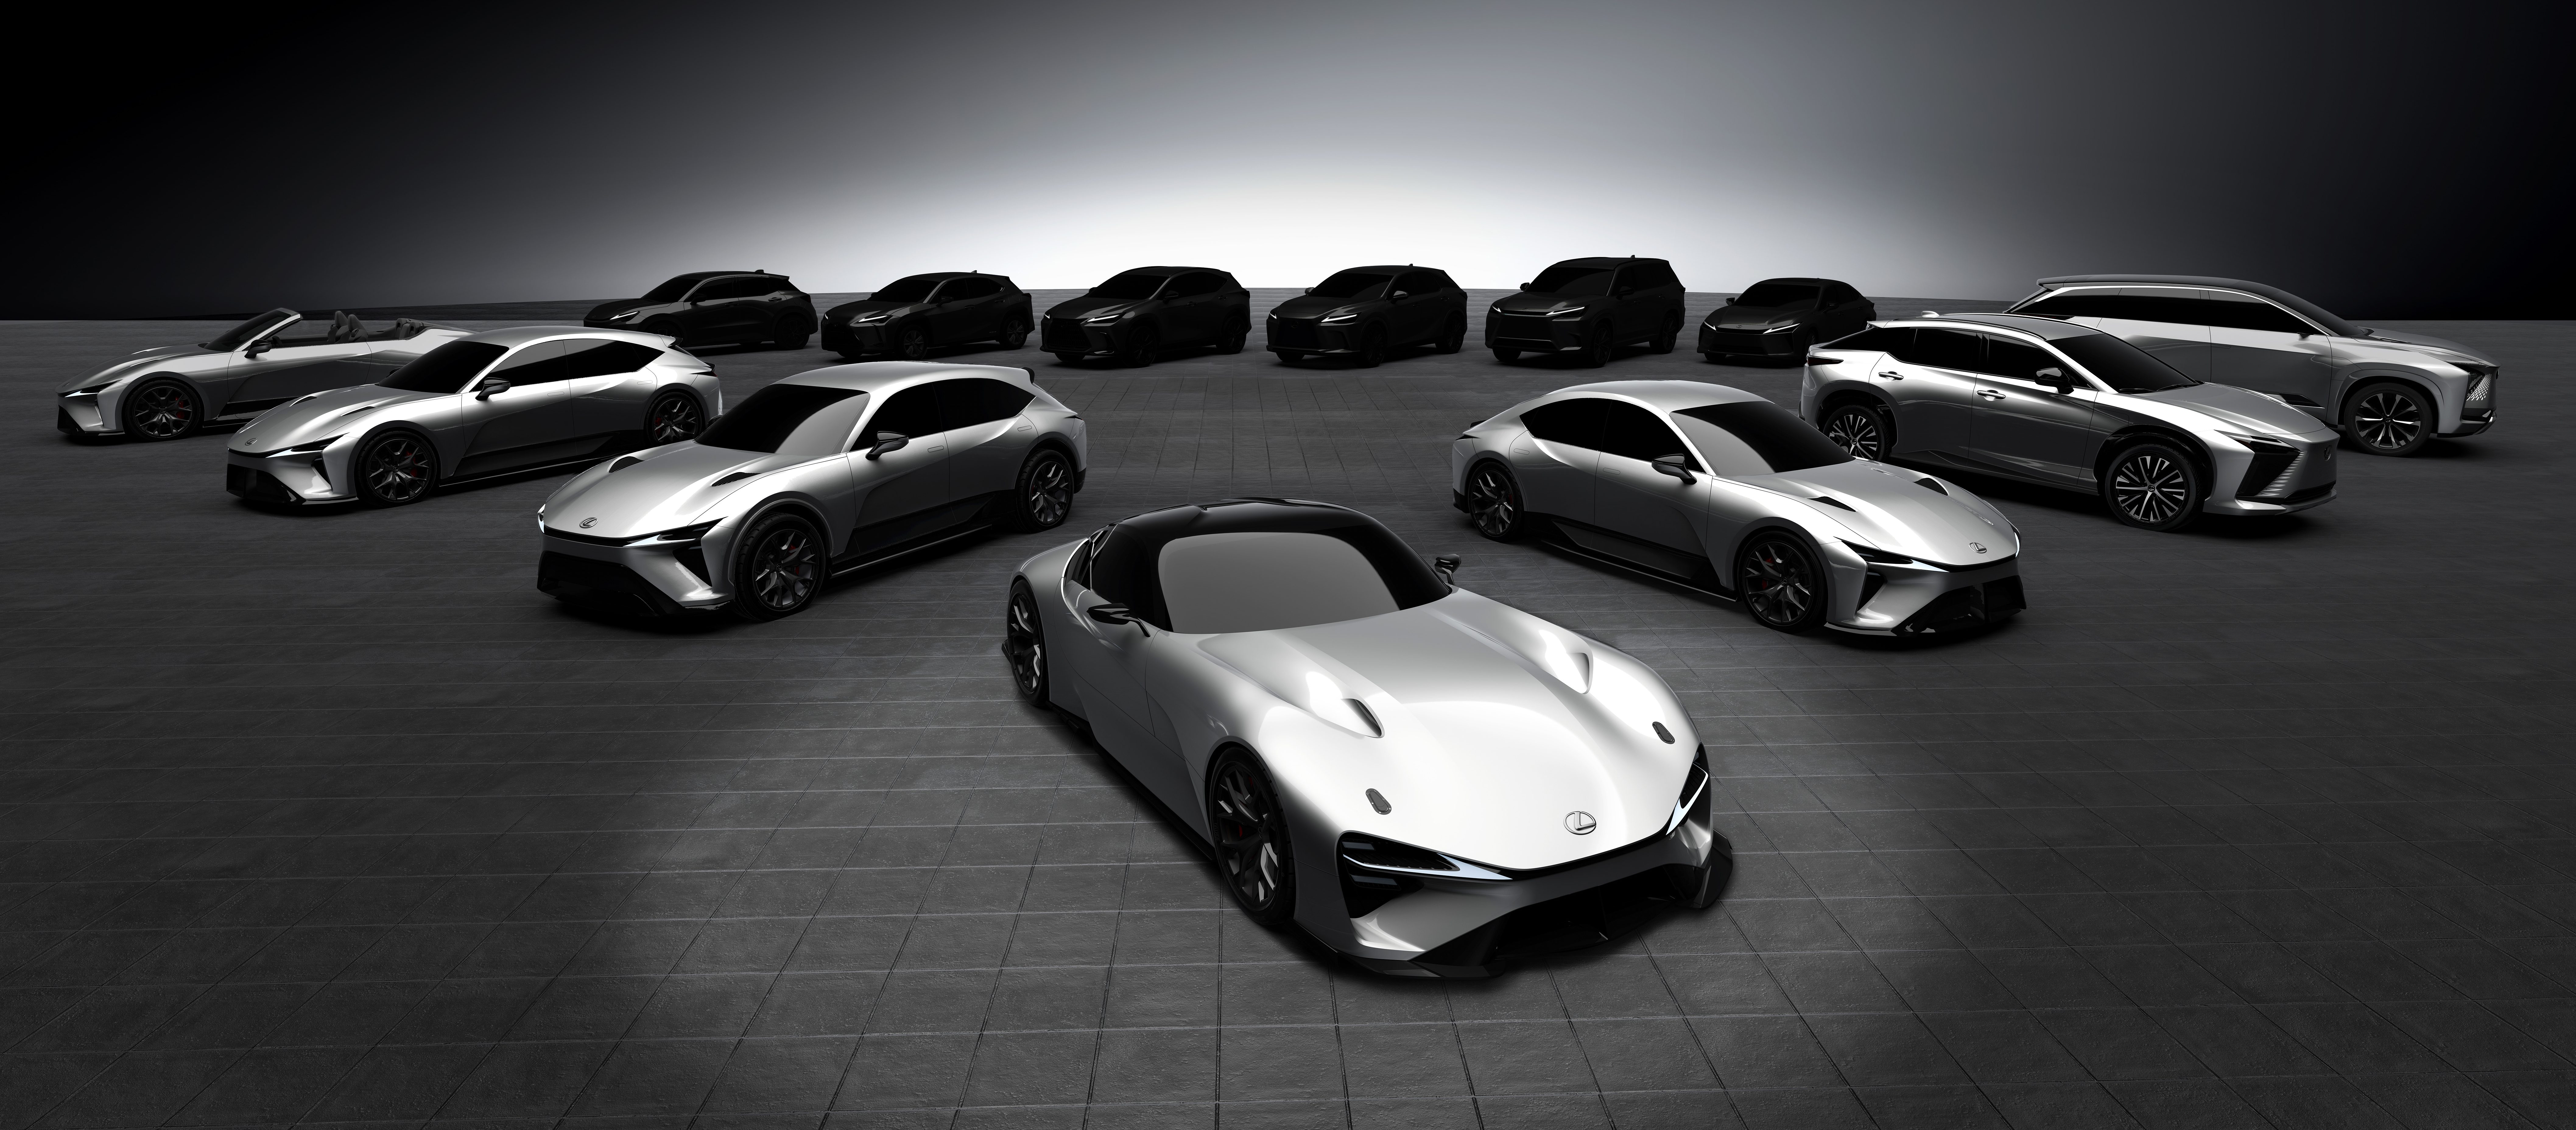 Toyota Releases More Images Of Possible New Lexus Electric Sports Cars With 430 Miles Of Range Electrek